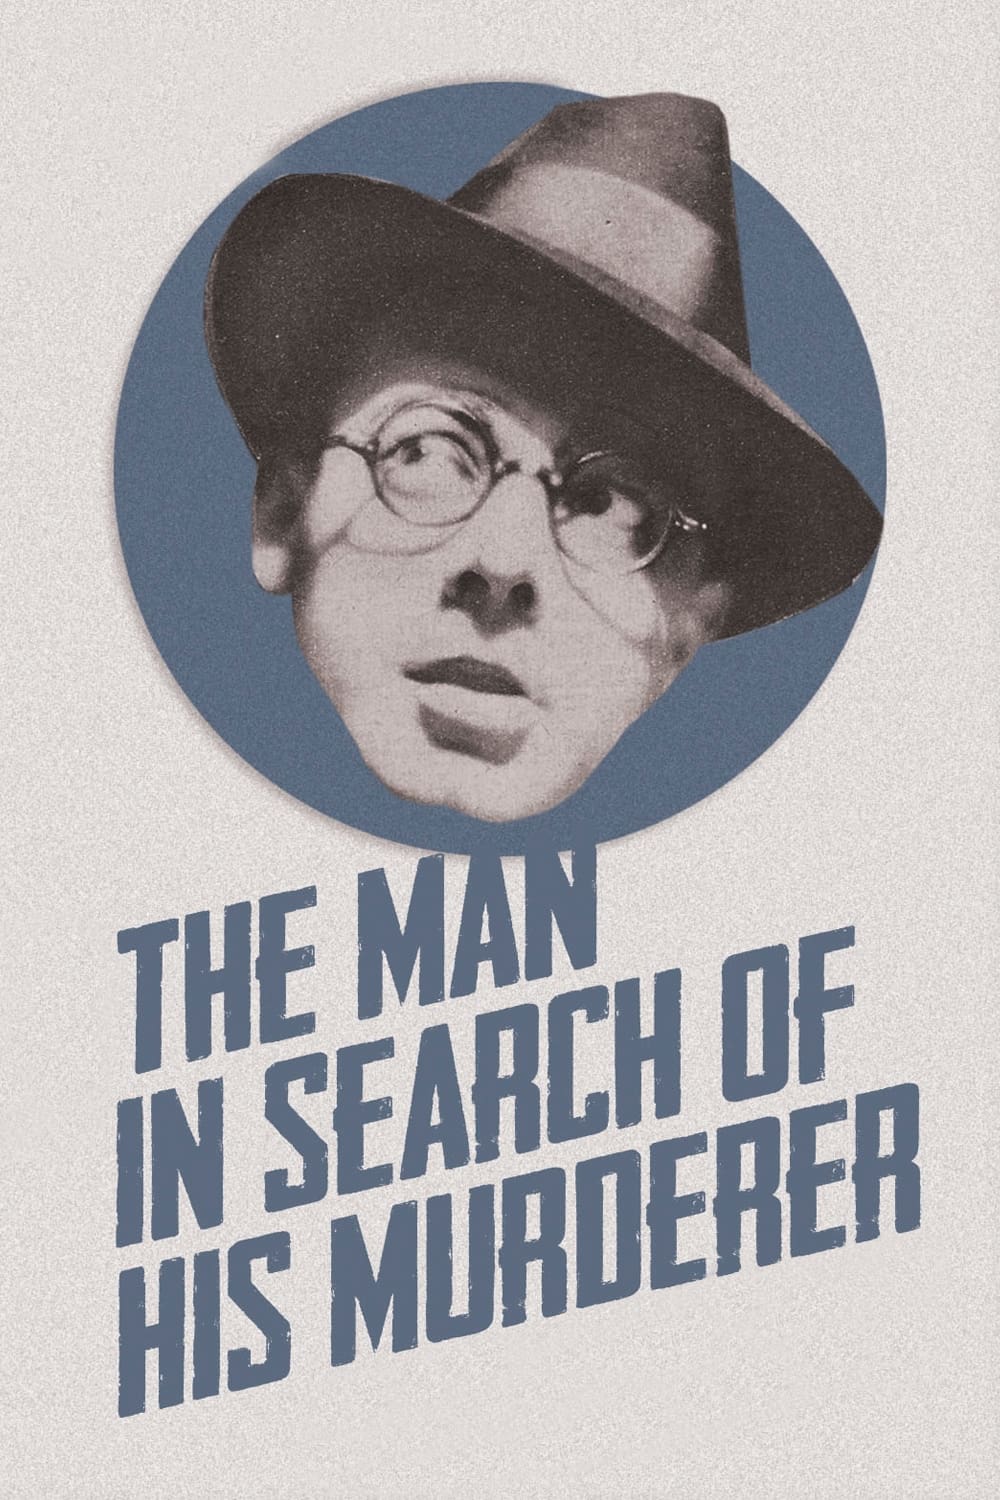 Looking for His Murderer (1931)